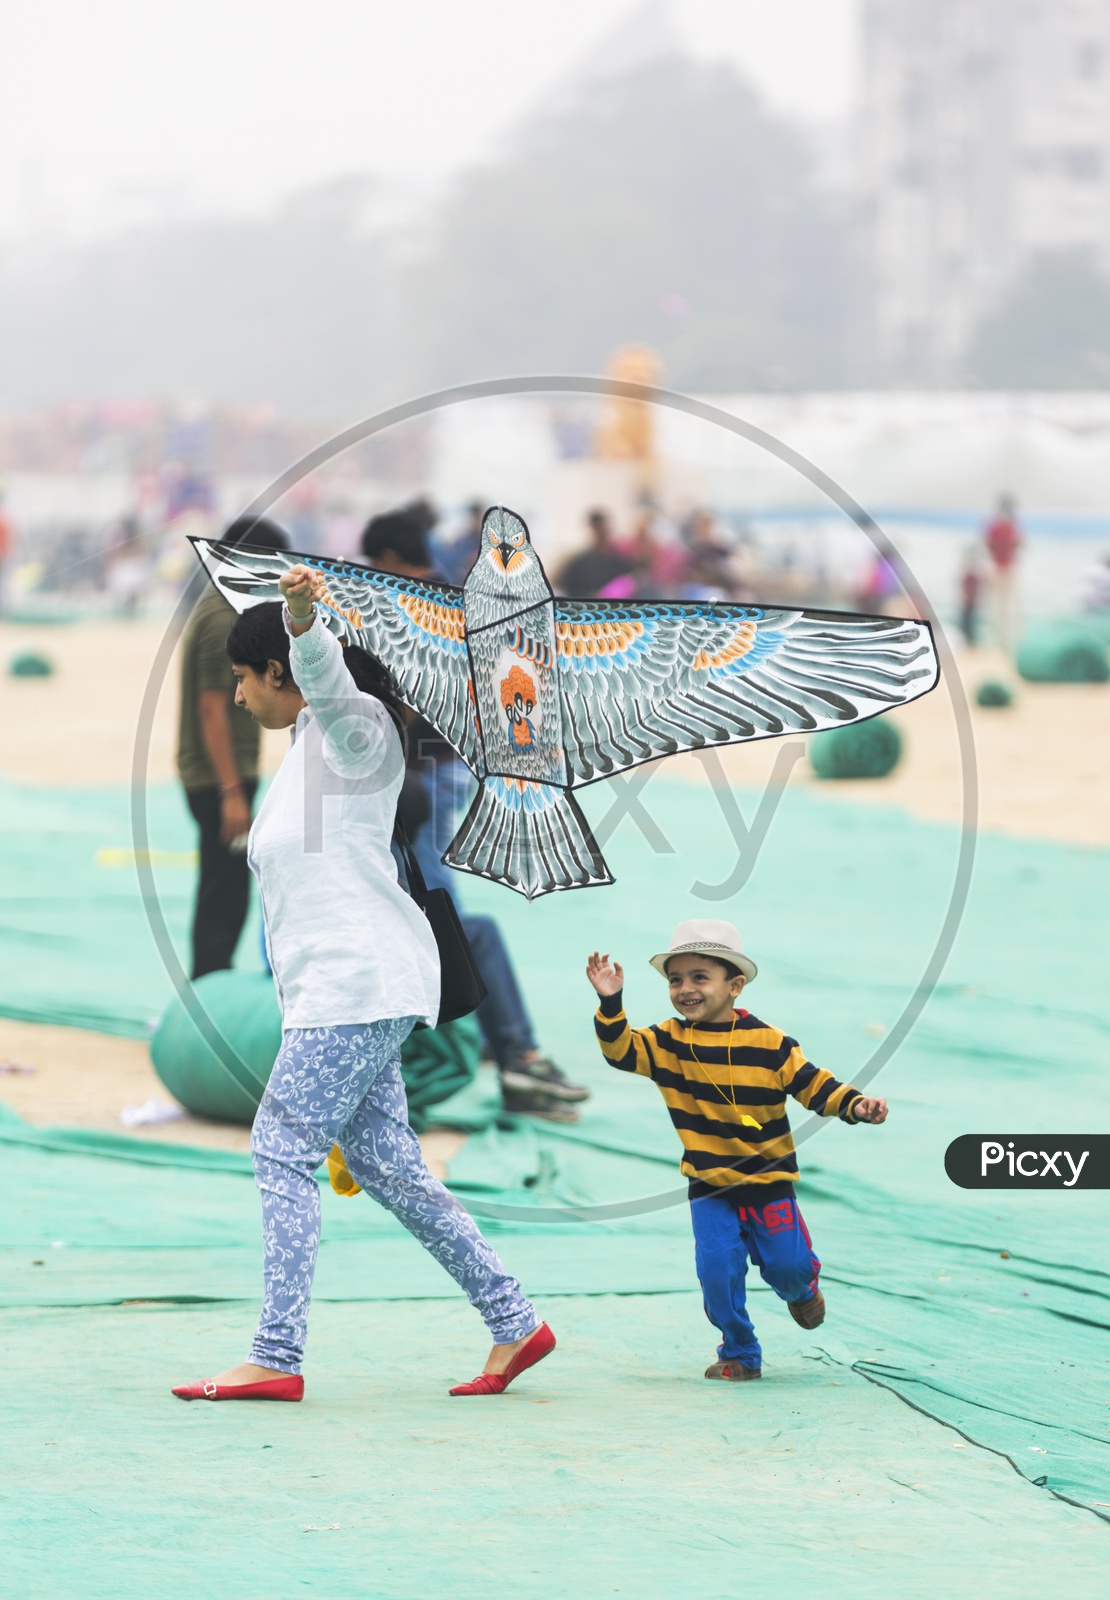 Indian Children Playing With Kites in a Kite Festival